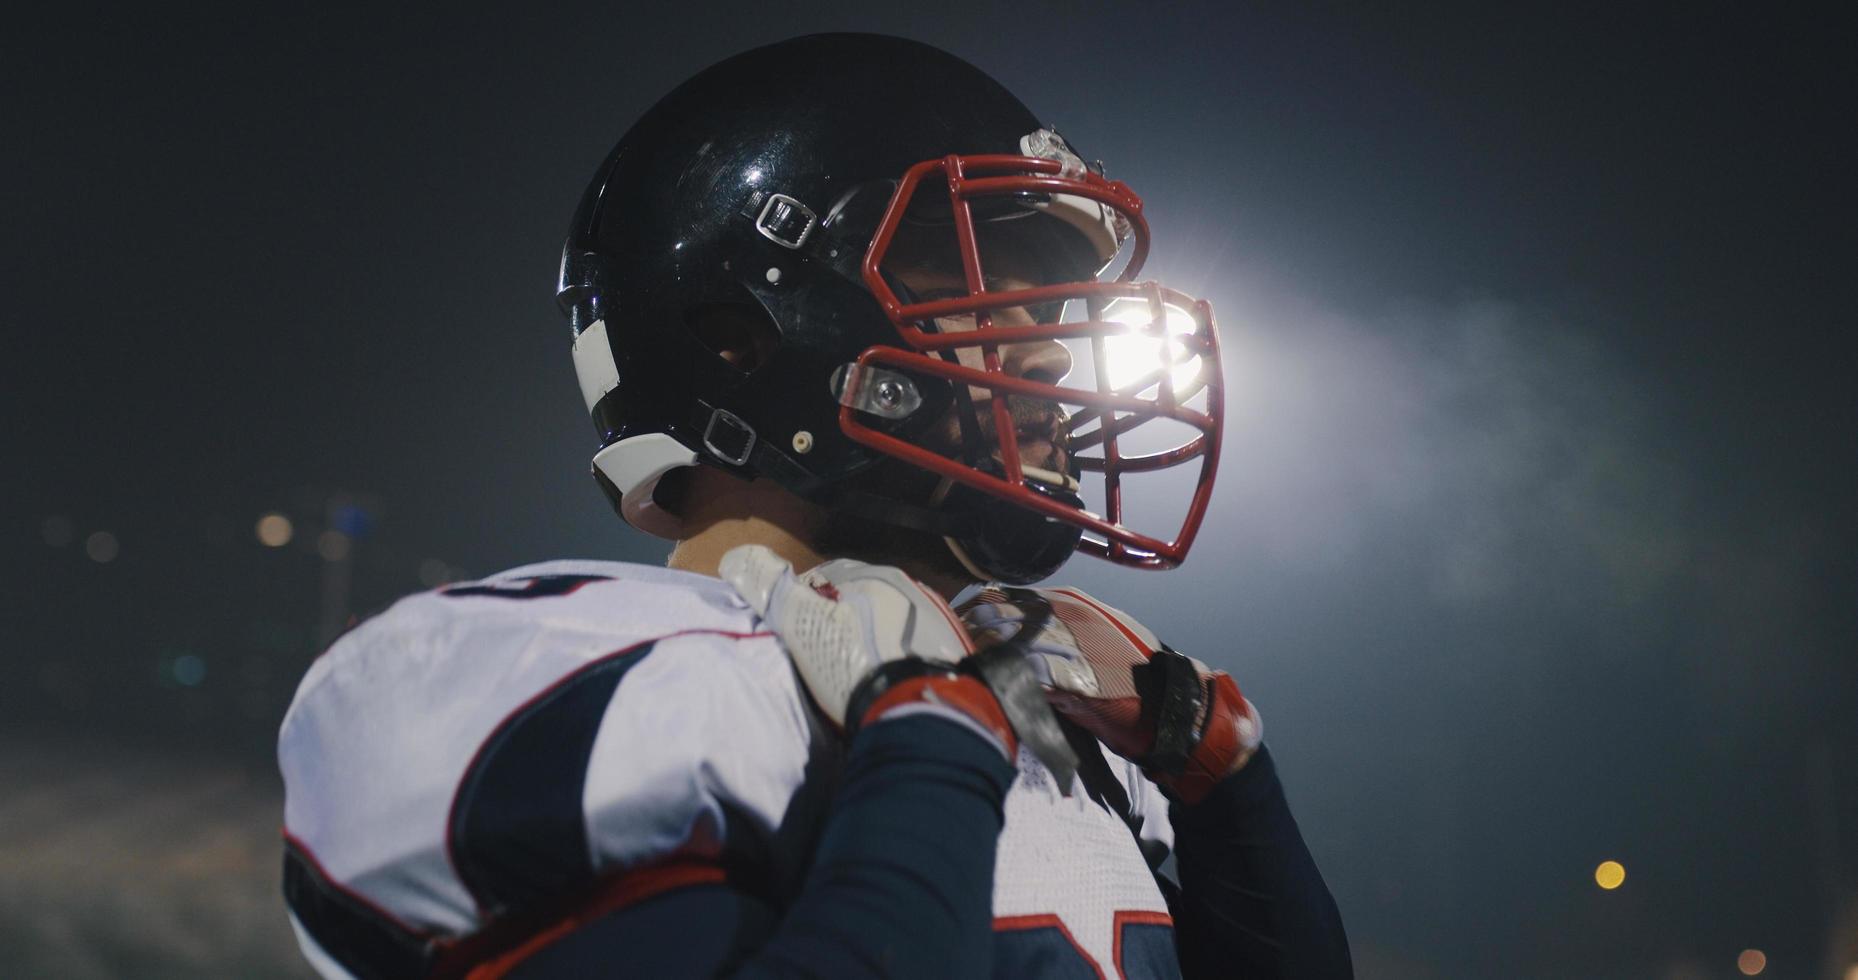 American Football Player Putting On Helmet on large stadium with lights in background photo